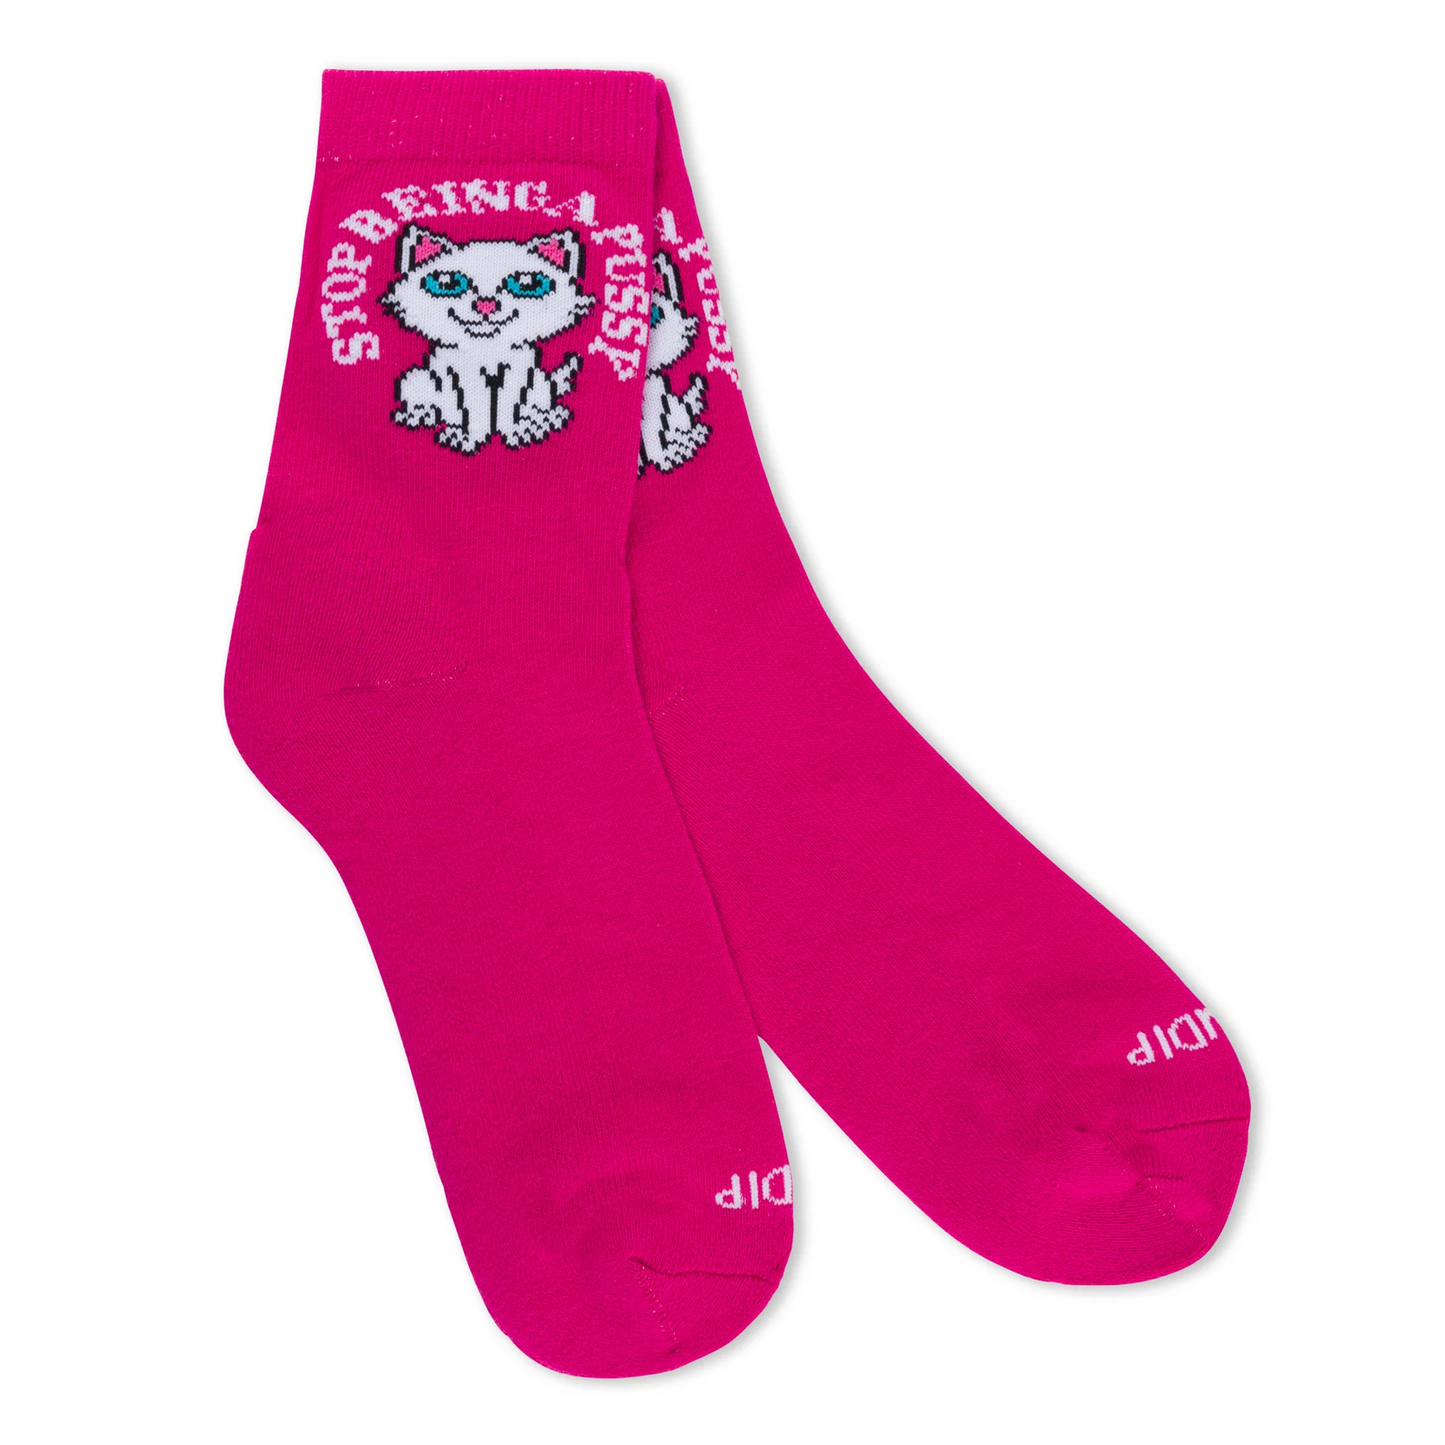 RIPNDIP STOP BEING A PUSSY 2.0 SOCKS (PINK)